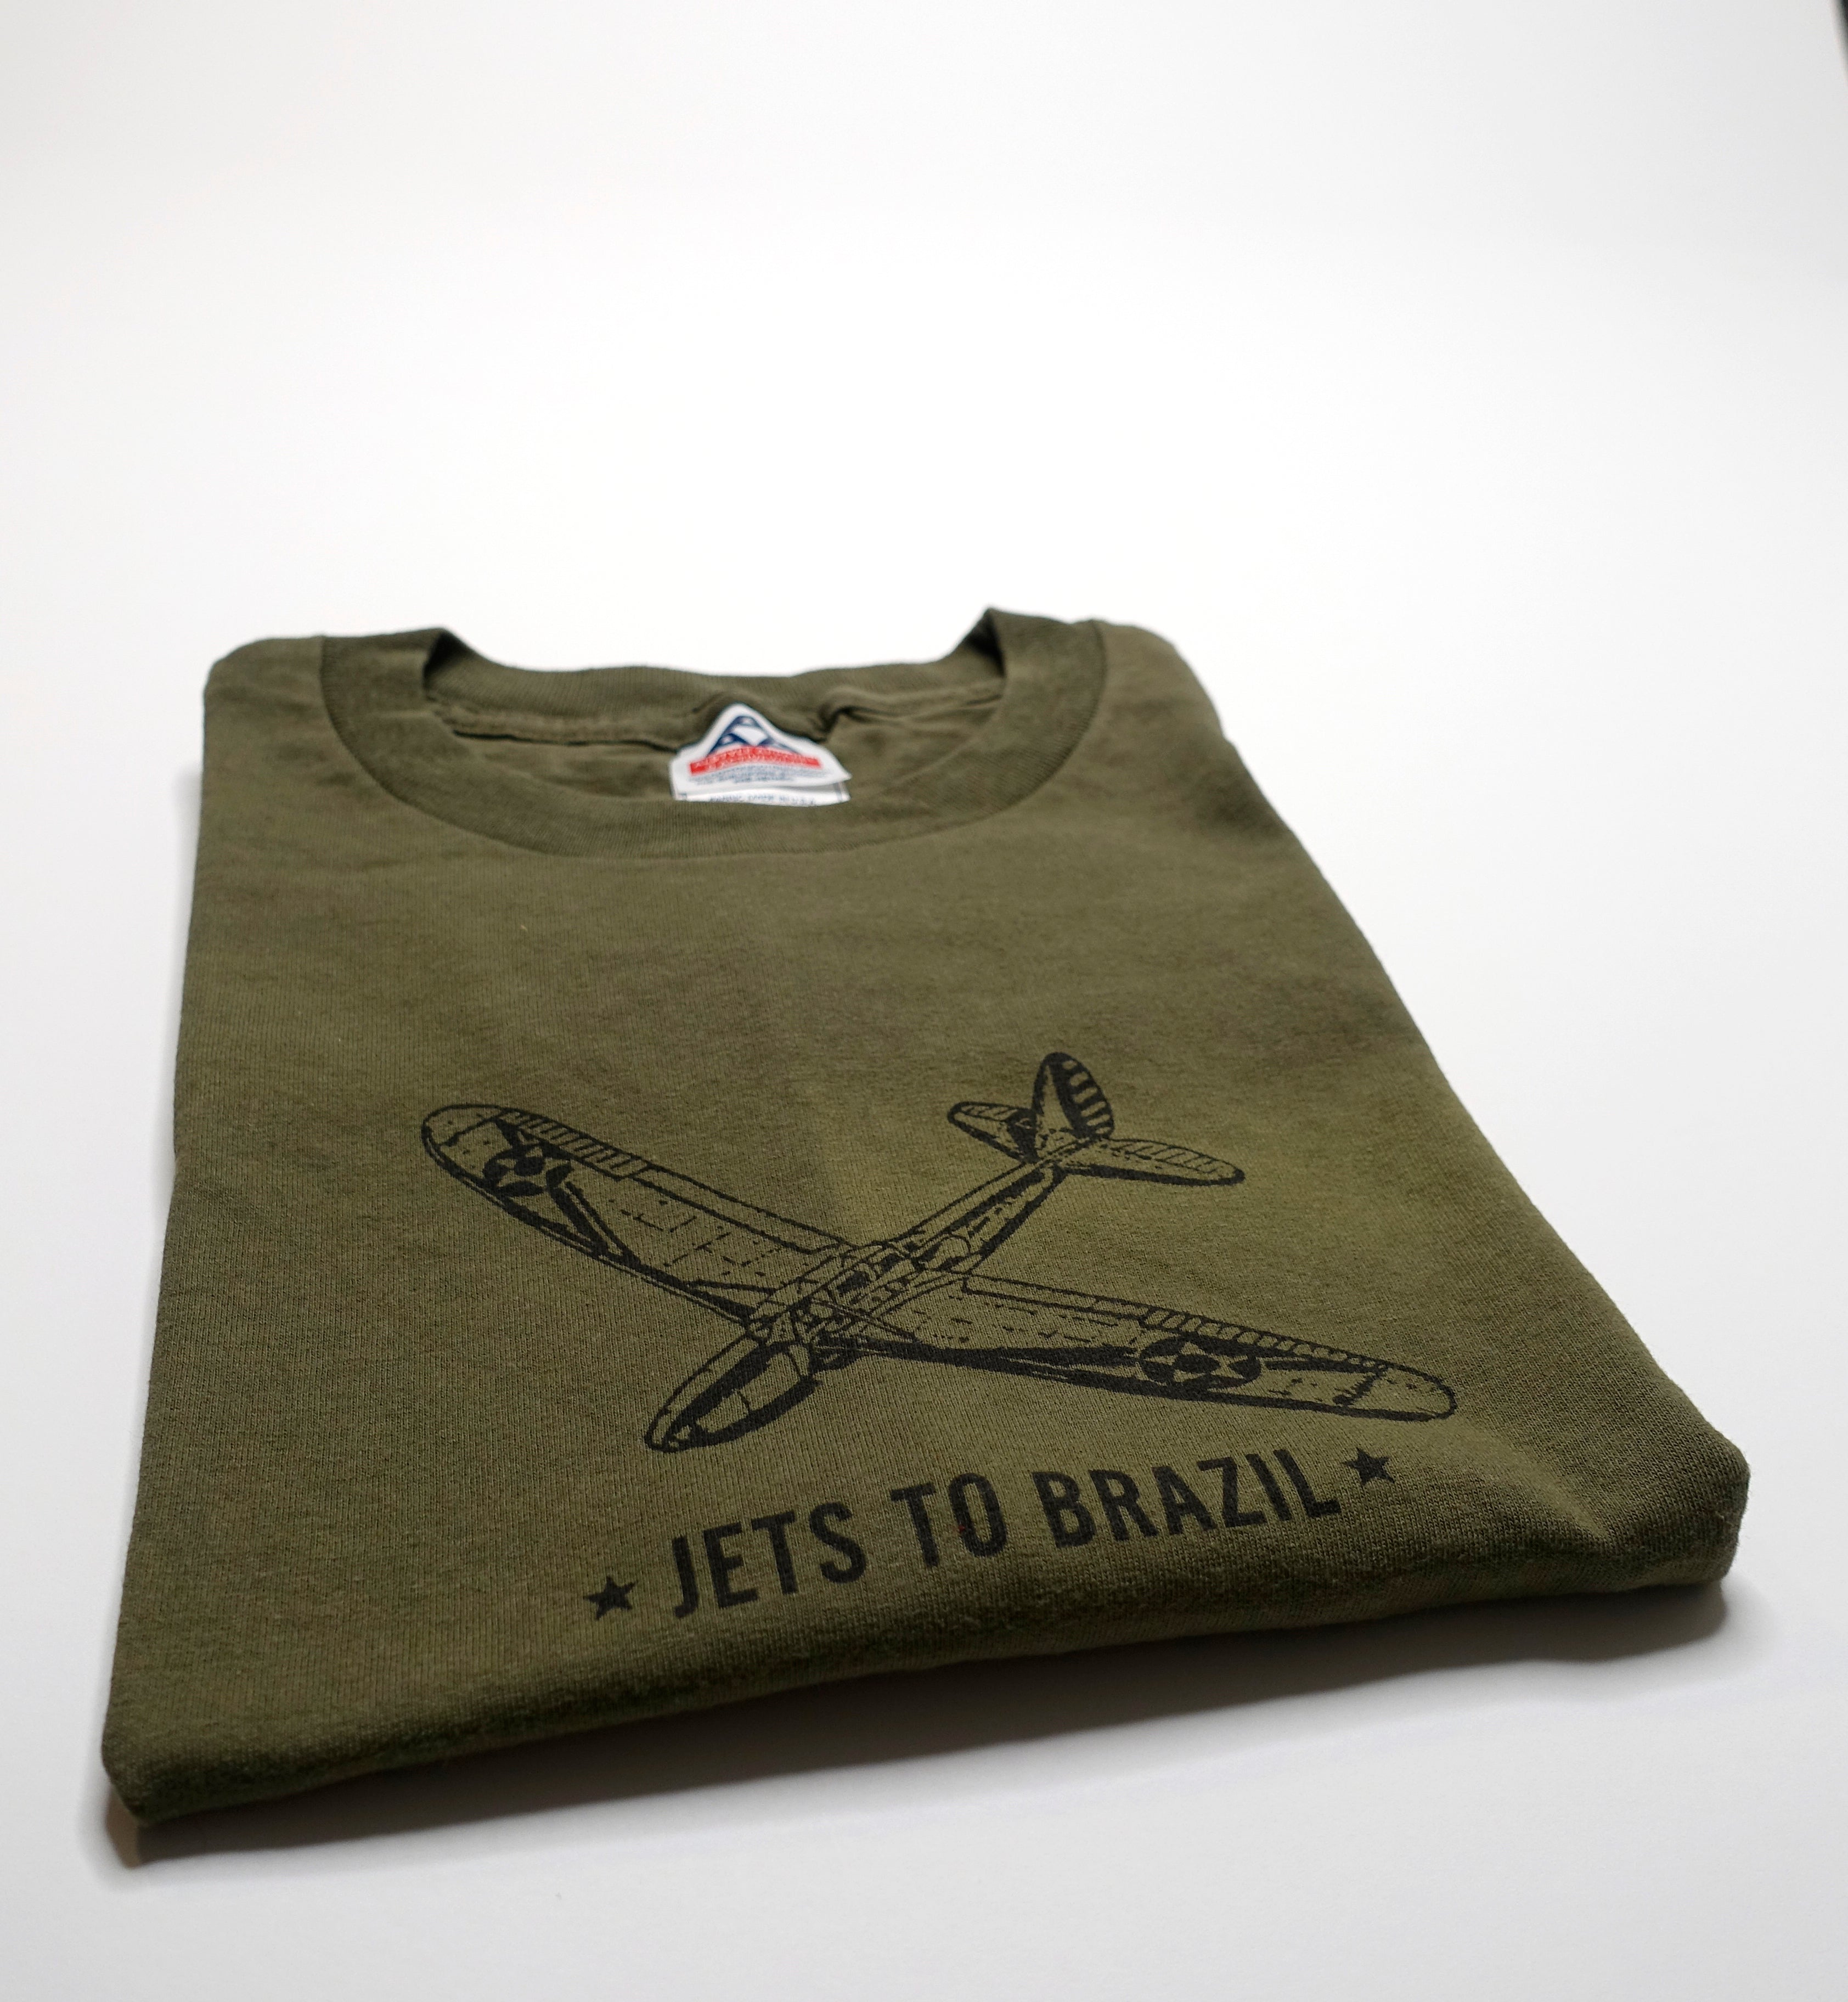 Jets To Brazil - Glider Tour Shirt Size Large (Green)